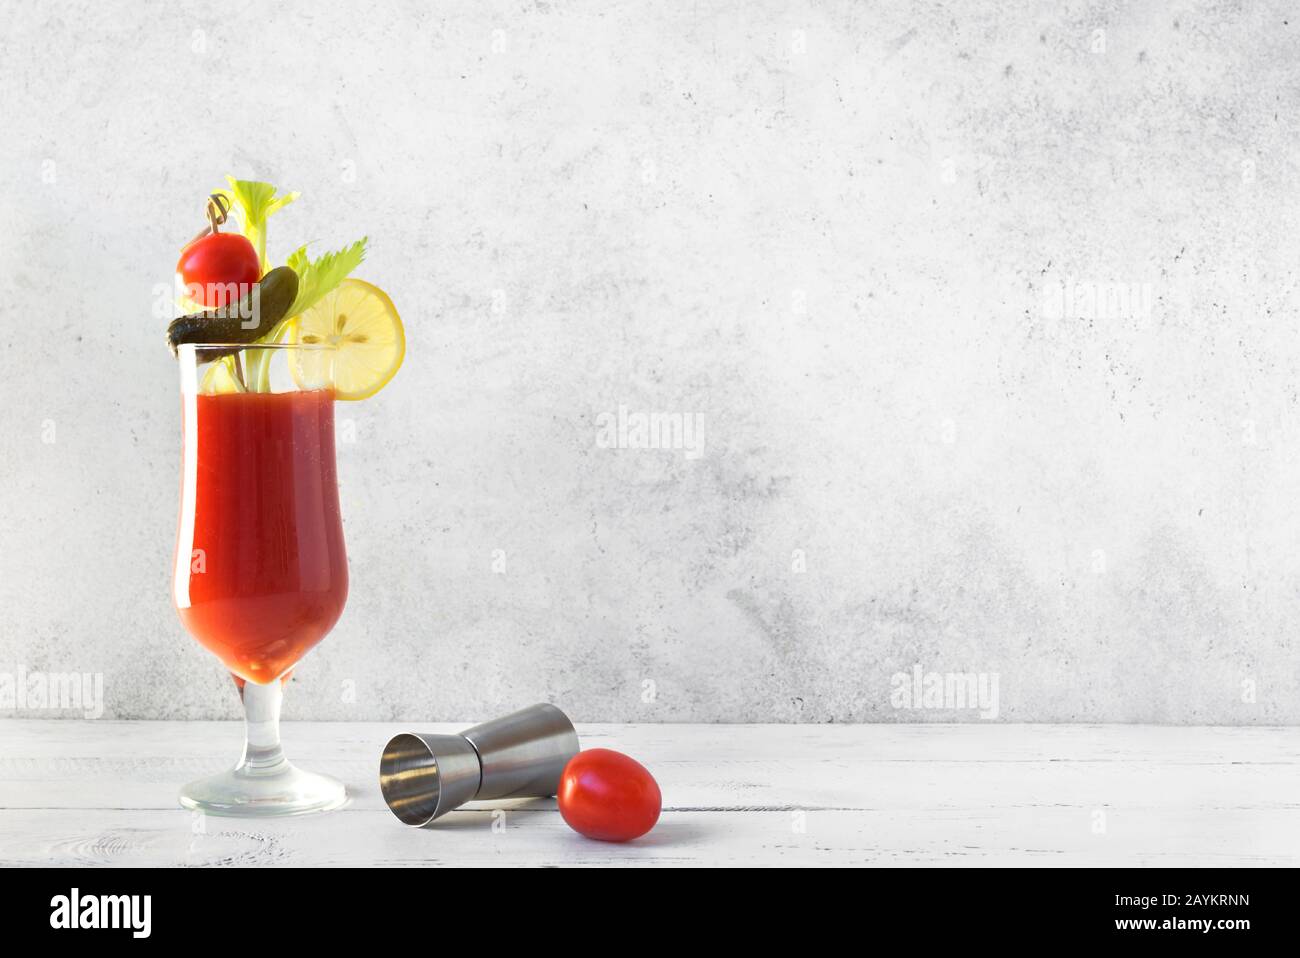 https://c8.alamy.com/comp/2AYKRNN/bloody-mary-cocktail-in-glass-with-garnishes-tomato-bloody-mary-or-caesar-spicy-drink-on-white-background-with-copy-space-2AYKRNN.jpg